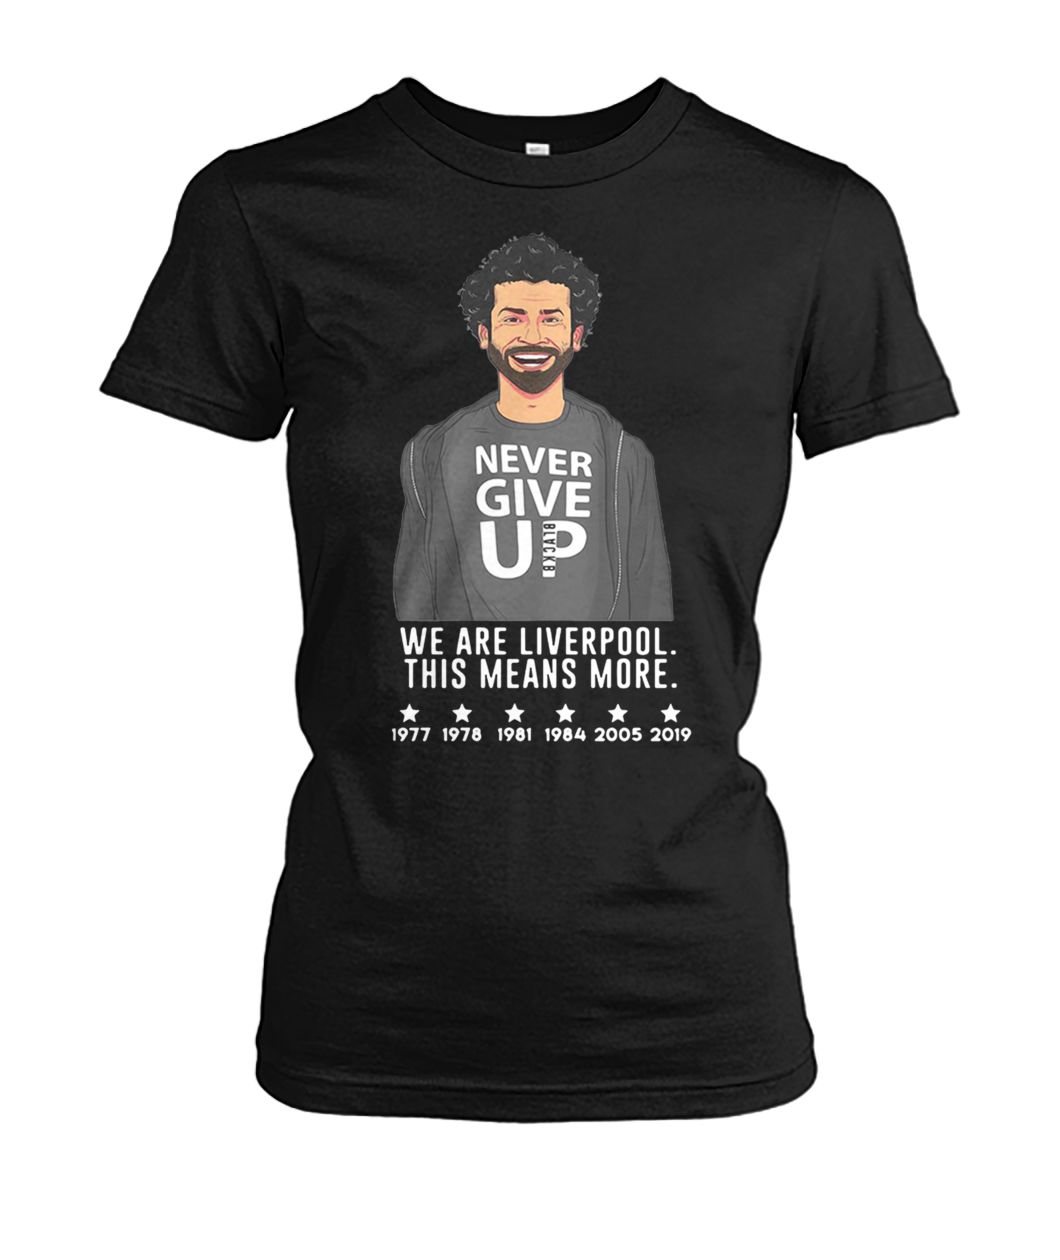 Liverpool mo salah never give up we are liverpool this means more blackb women's crew tee